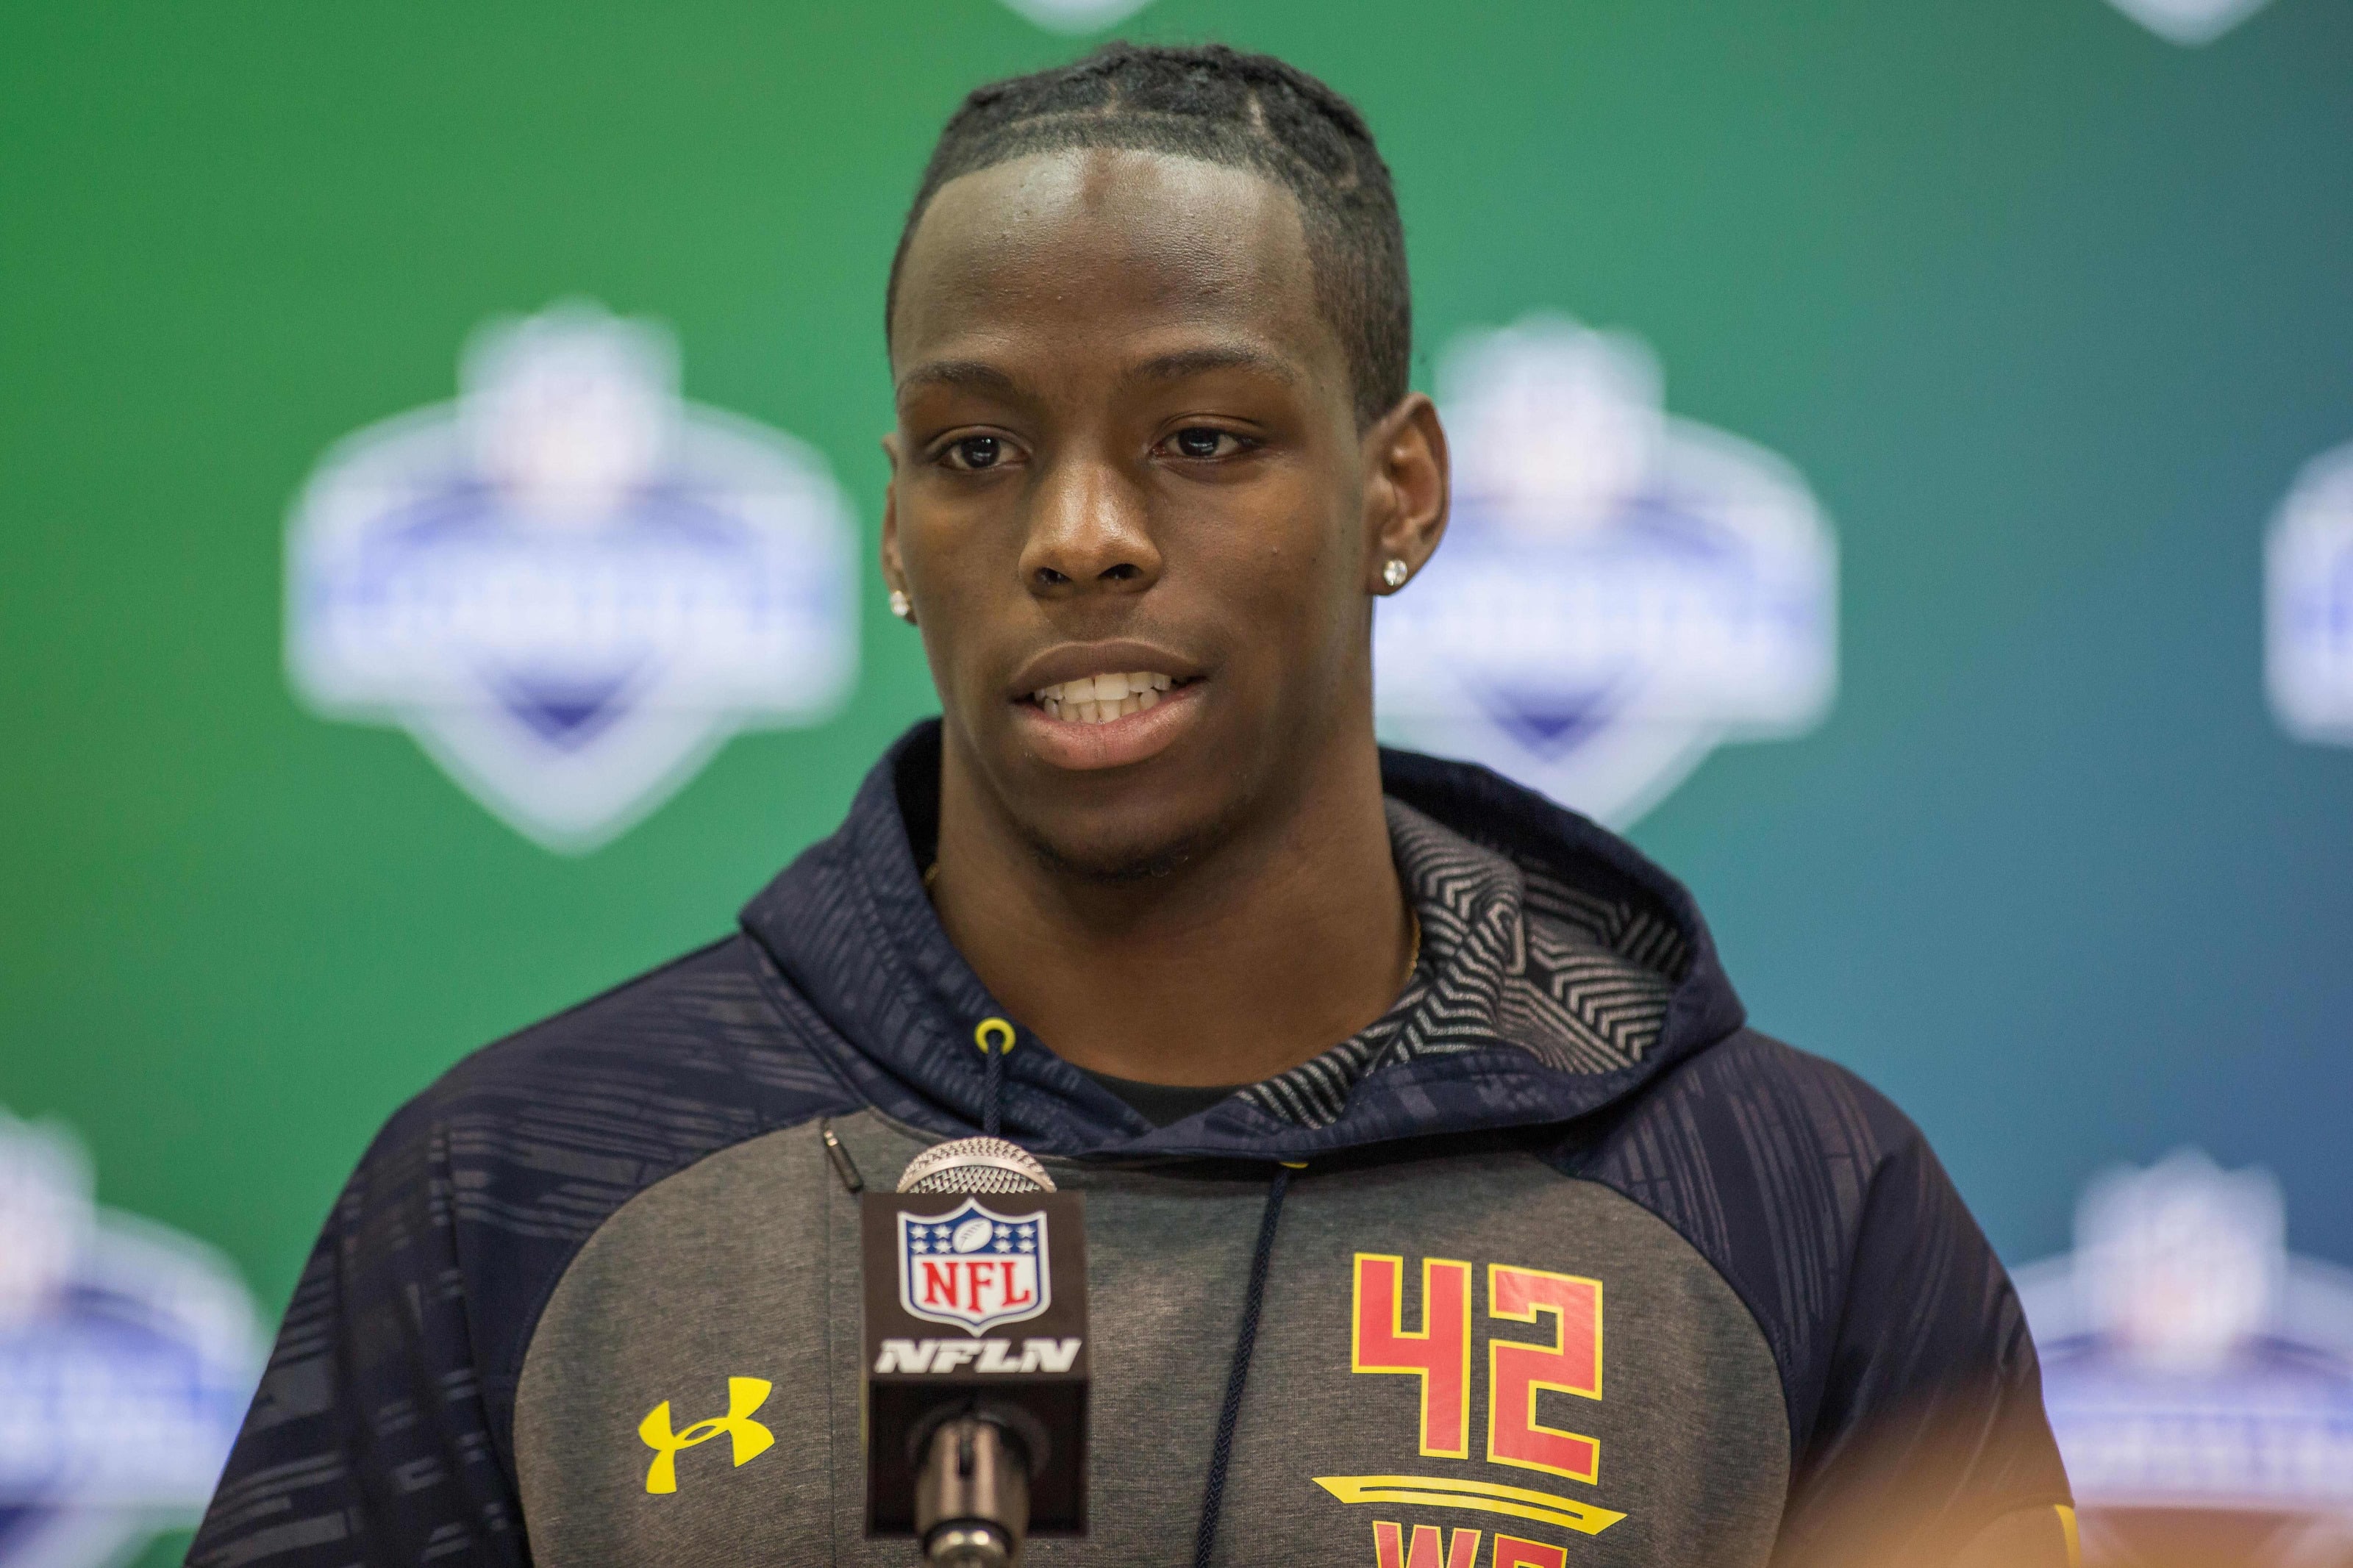 7 Fastest 40yard dash times in NFL Combine history